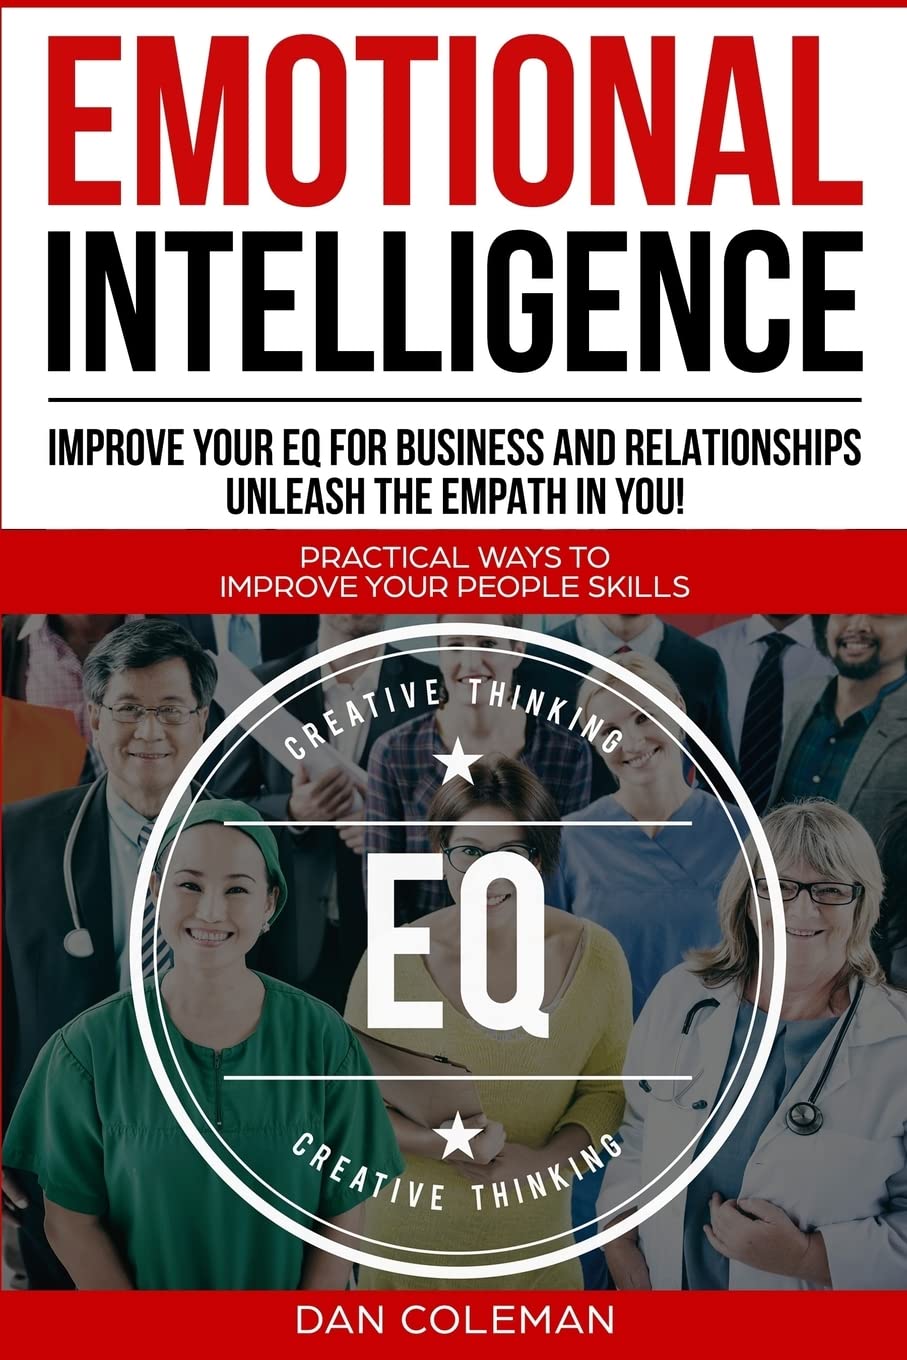 Dan Coleman - Emotional Intelligence. Improve Your EQ For Business And Relationships - Unleash The Empath In You